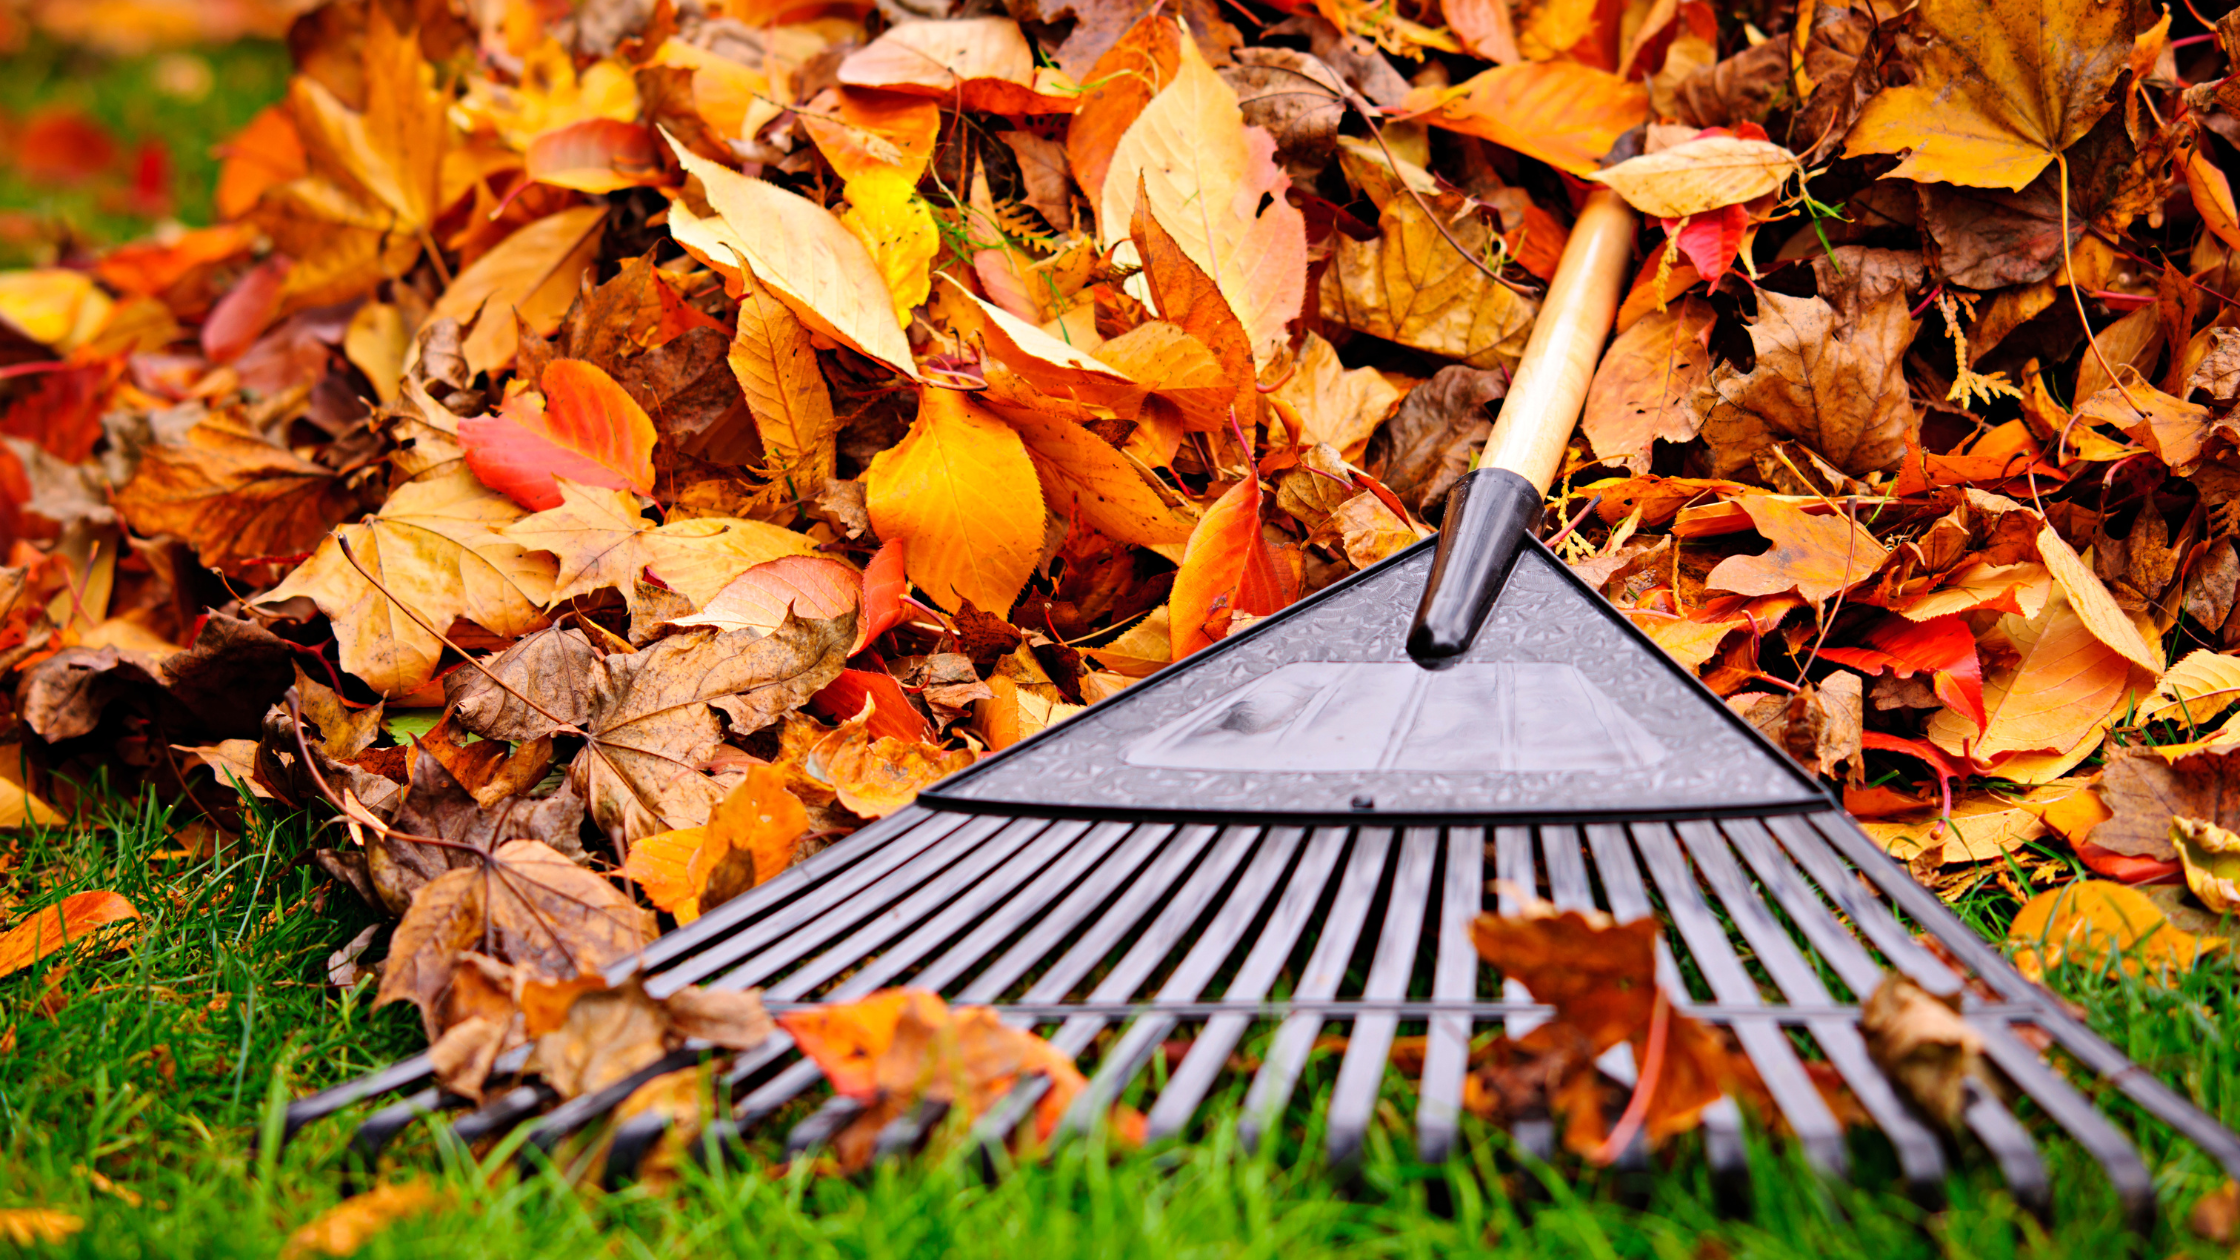 An autumn scene with a broom sweeping fallen leaves